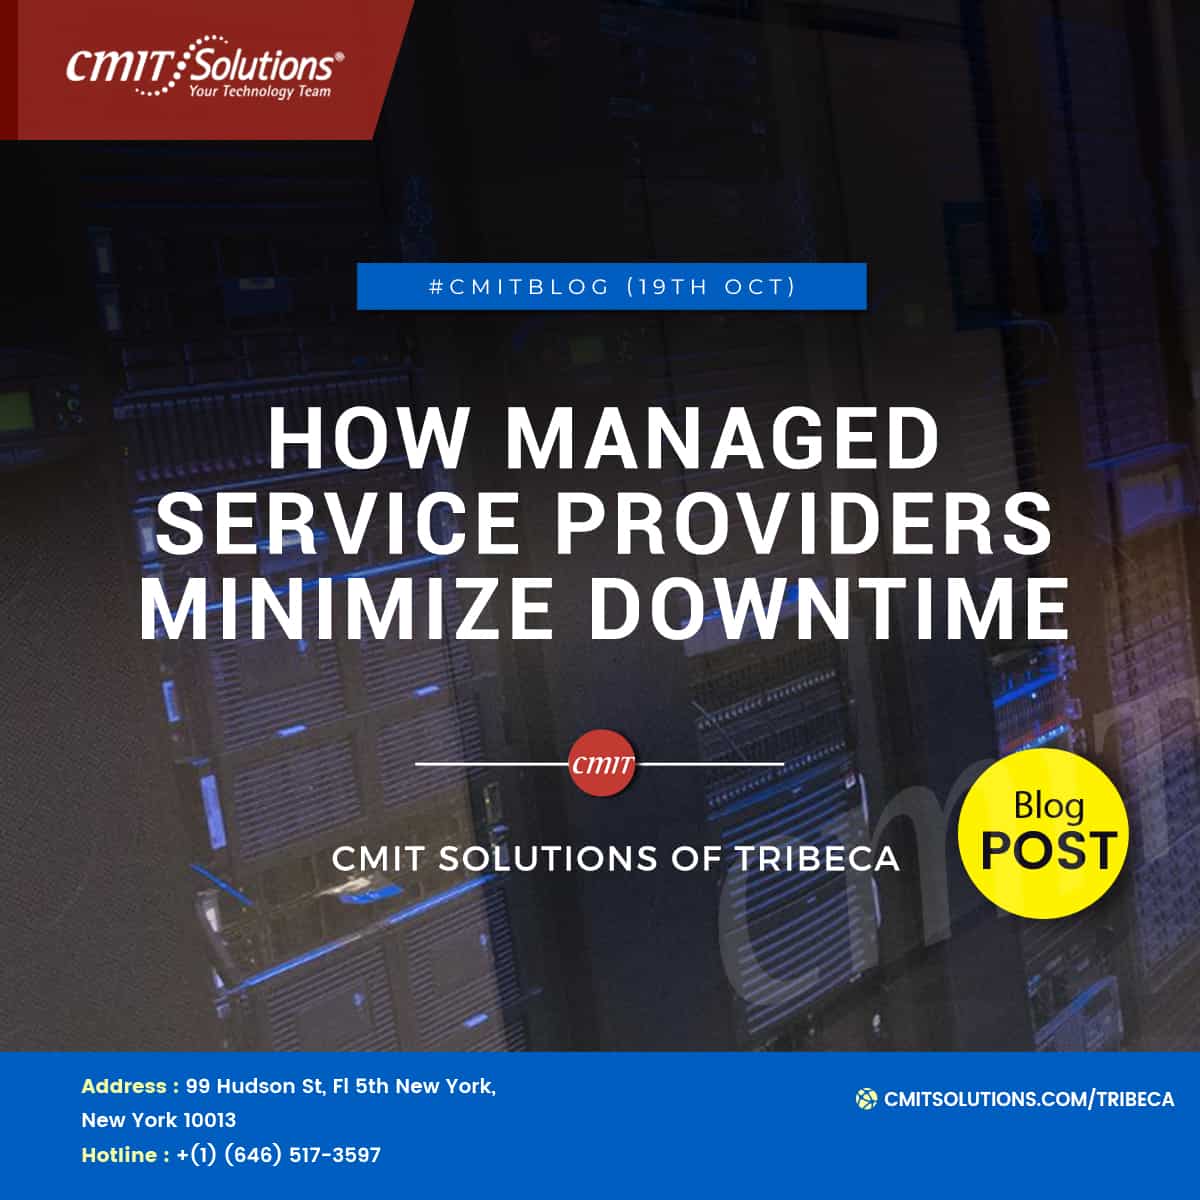 How managed service providers minimize downtime.